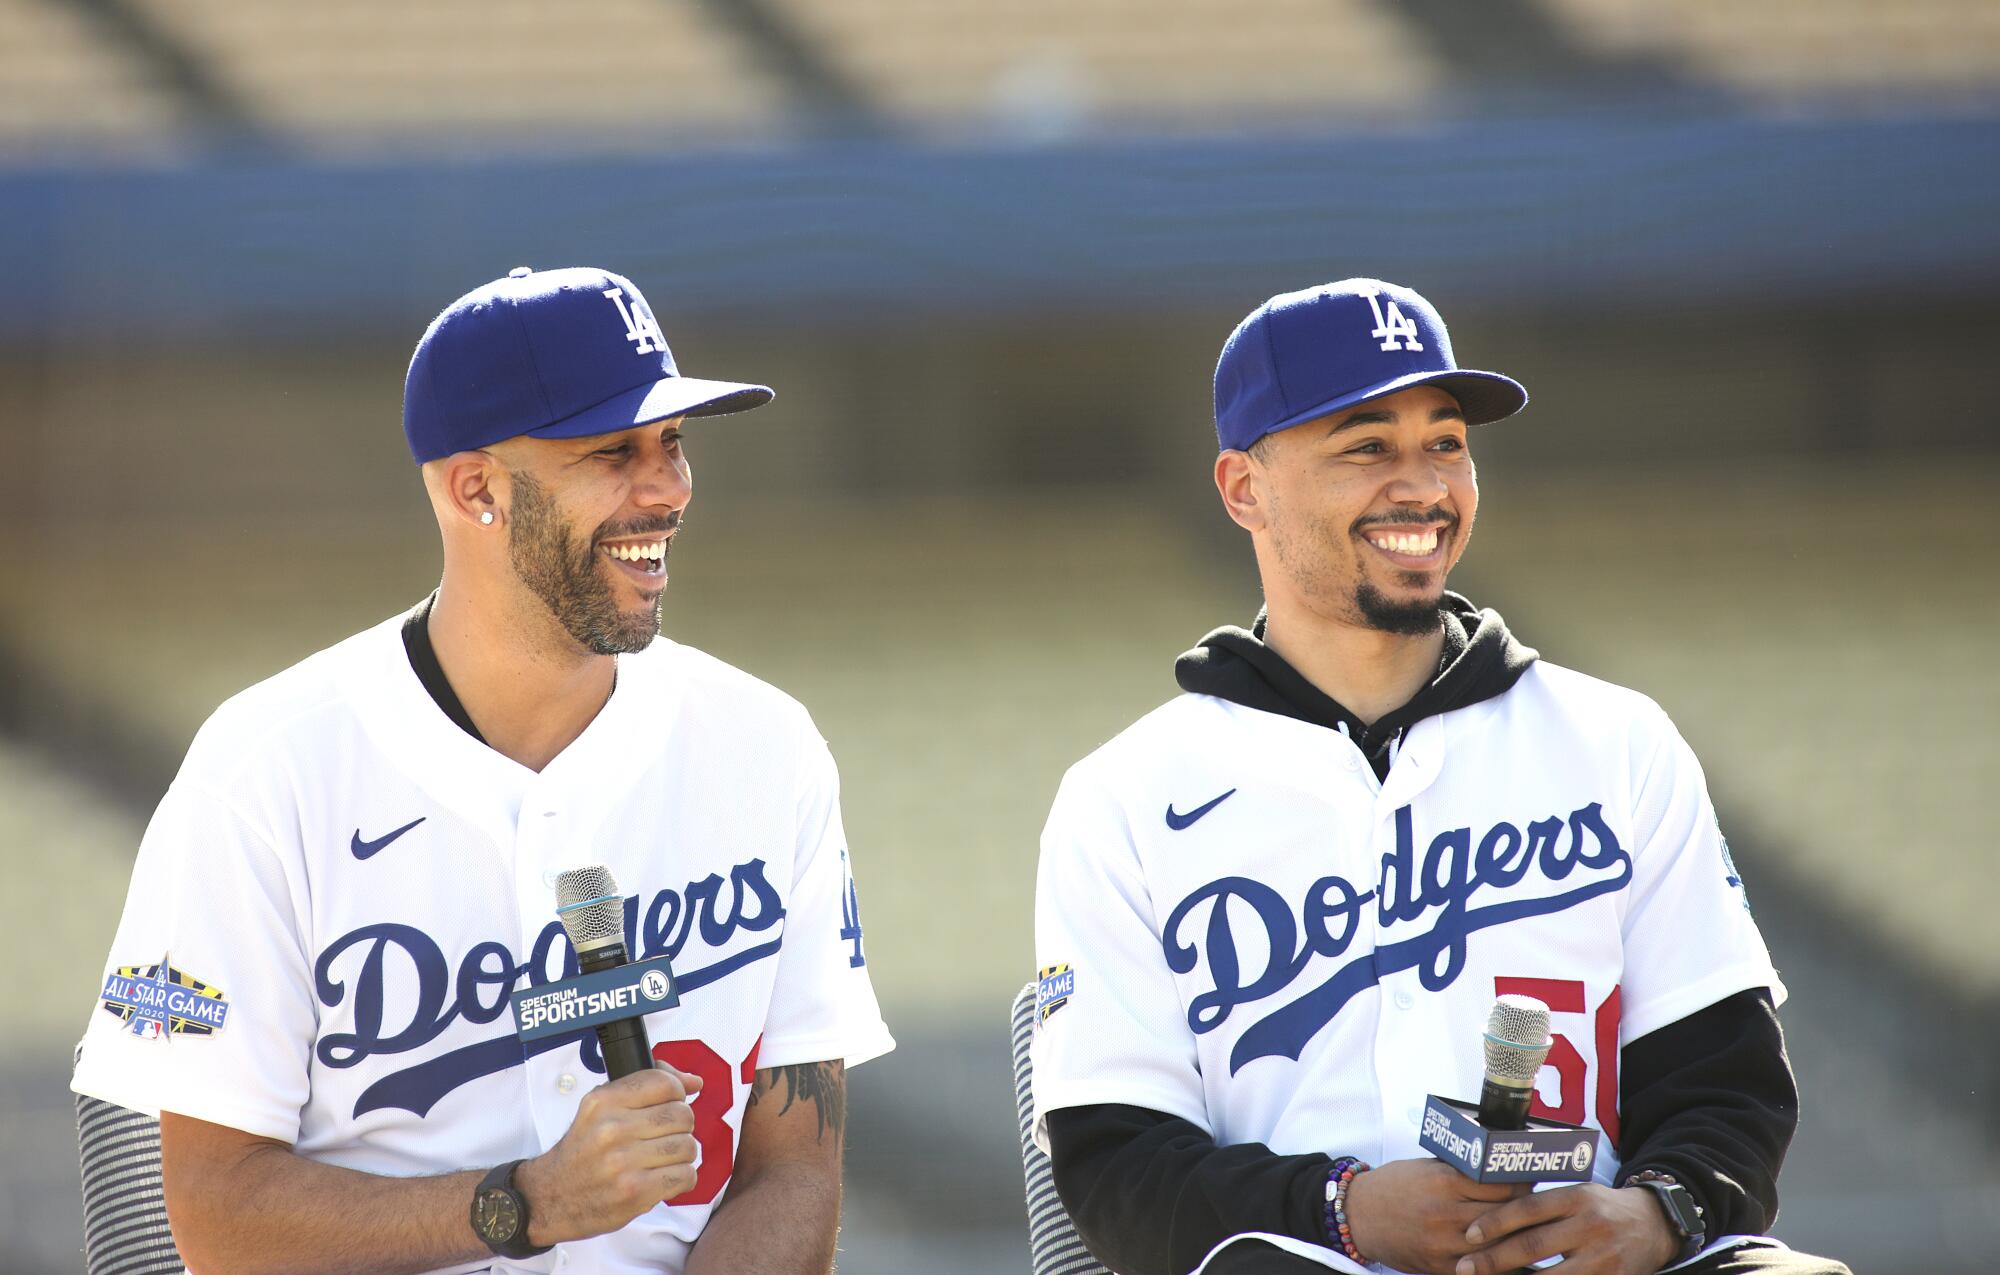 Pitcher David Price, left, and right fielder Mookie Betts are introduced as Dodgers at a news conference.